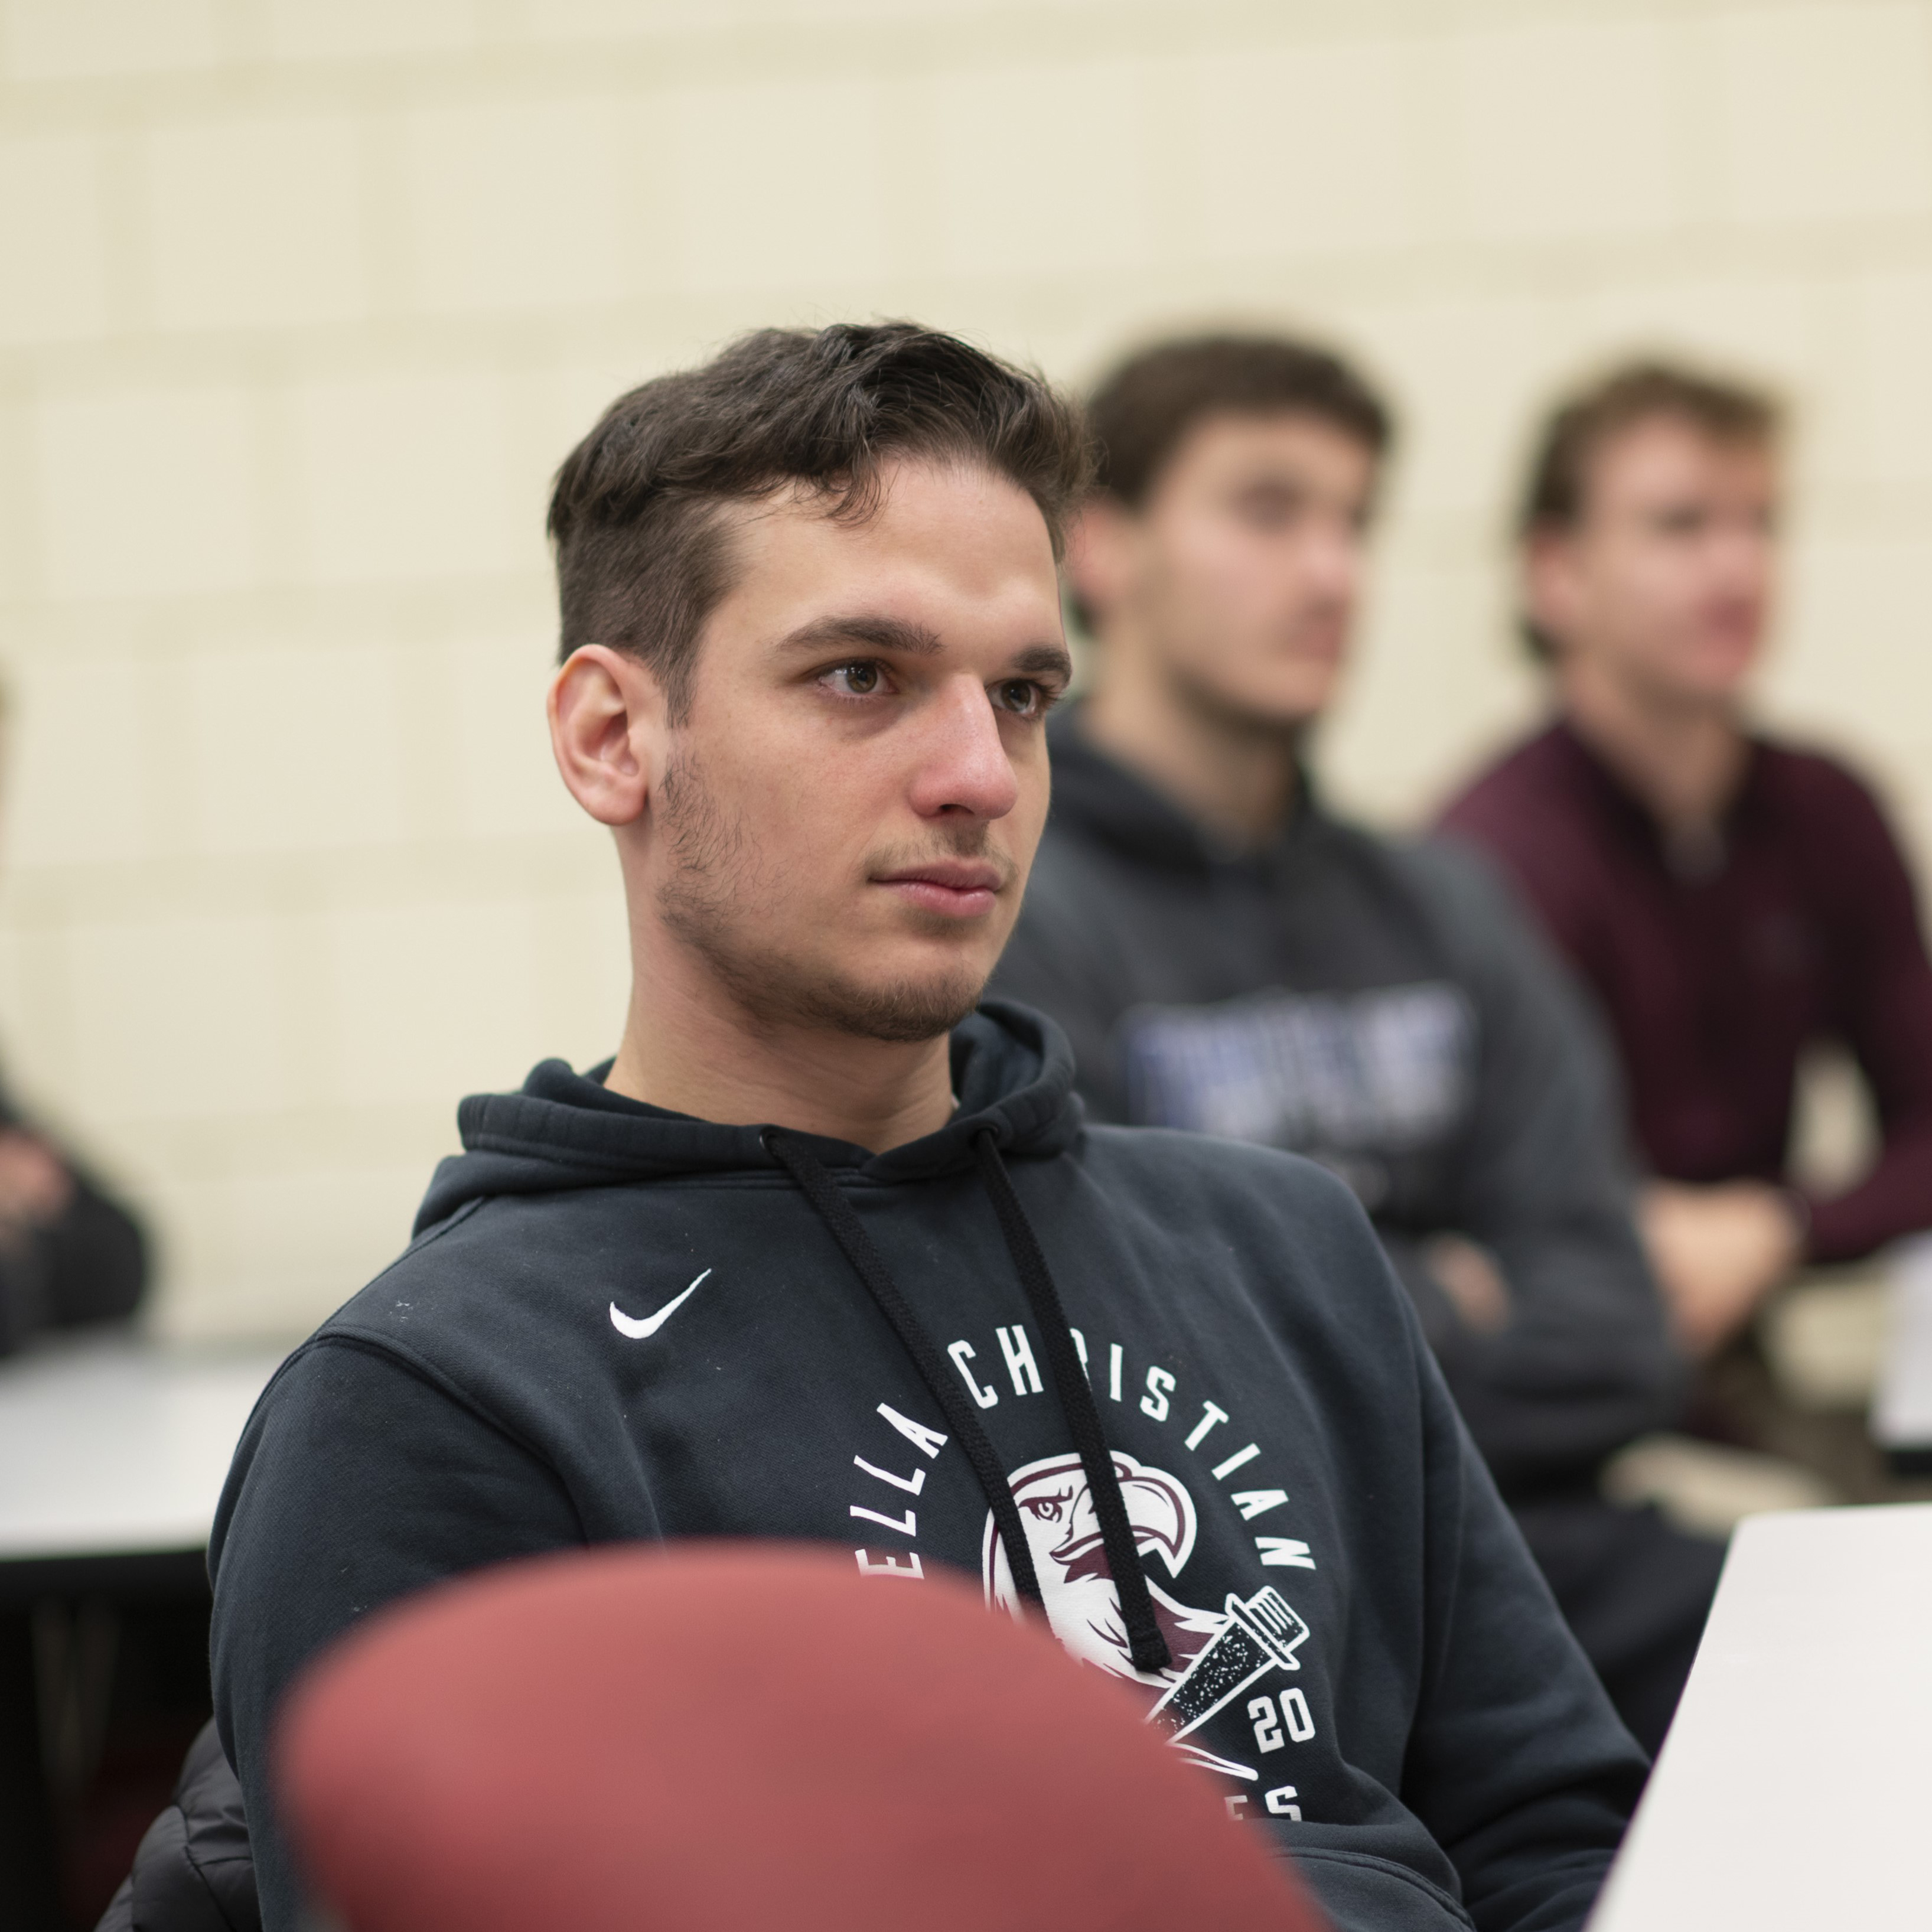 Male student sitting in class